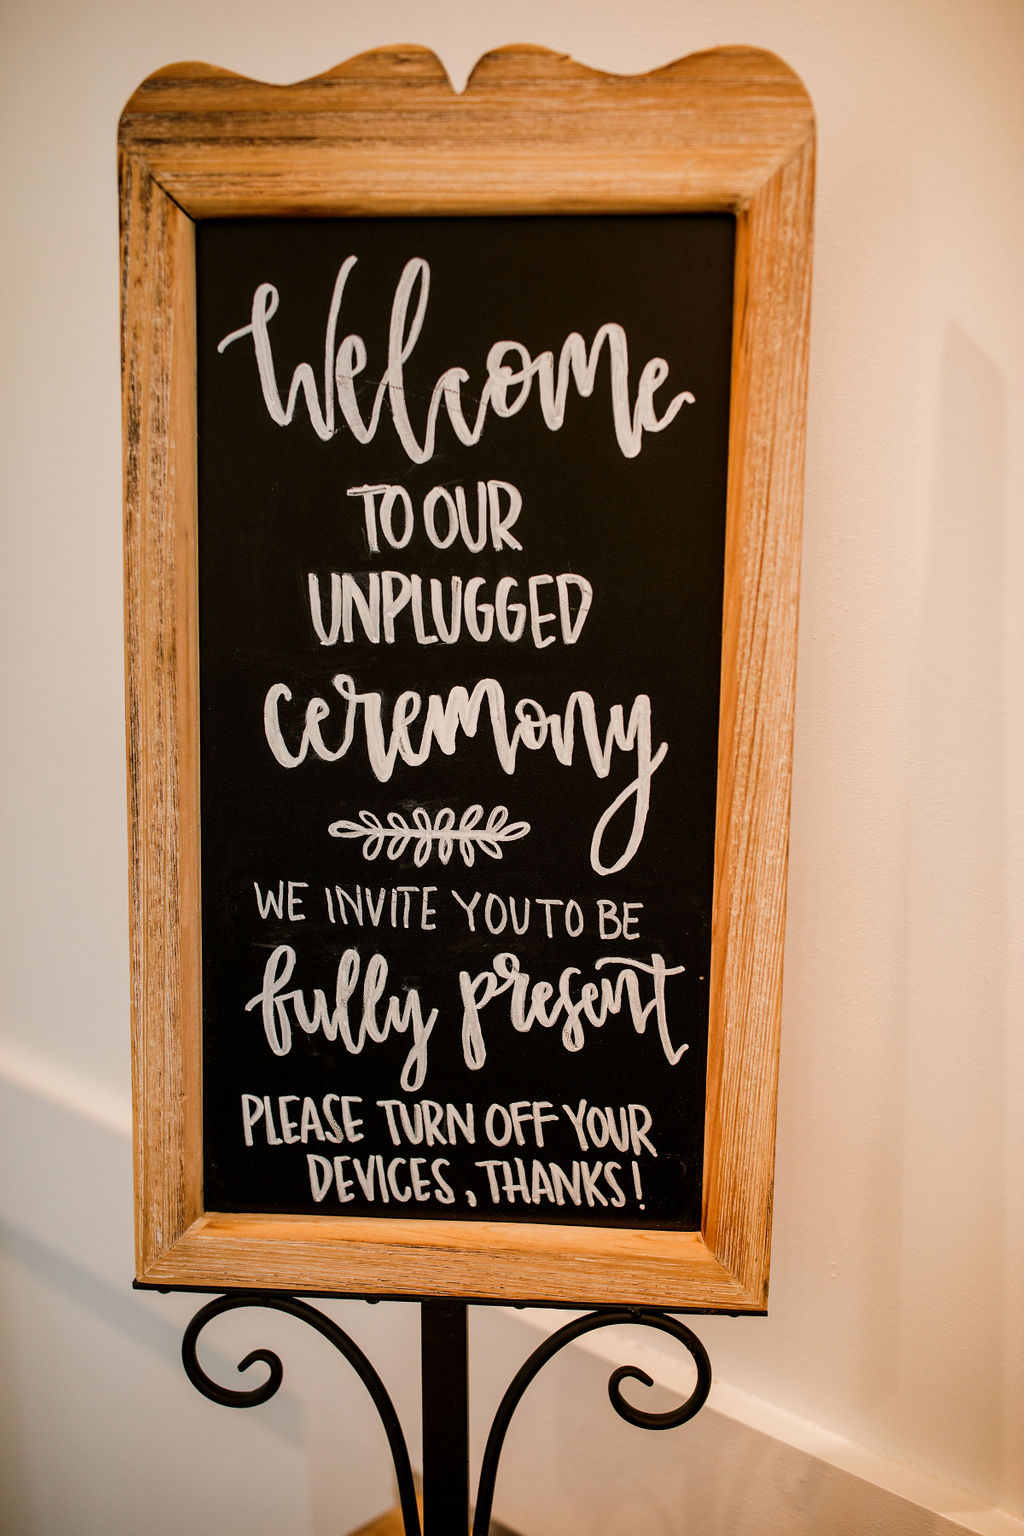 Wedding Ceremony Sign: Beautiful Graystone Quarry Wedding captured by John Myers Photography & Videography